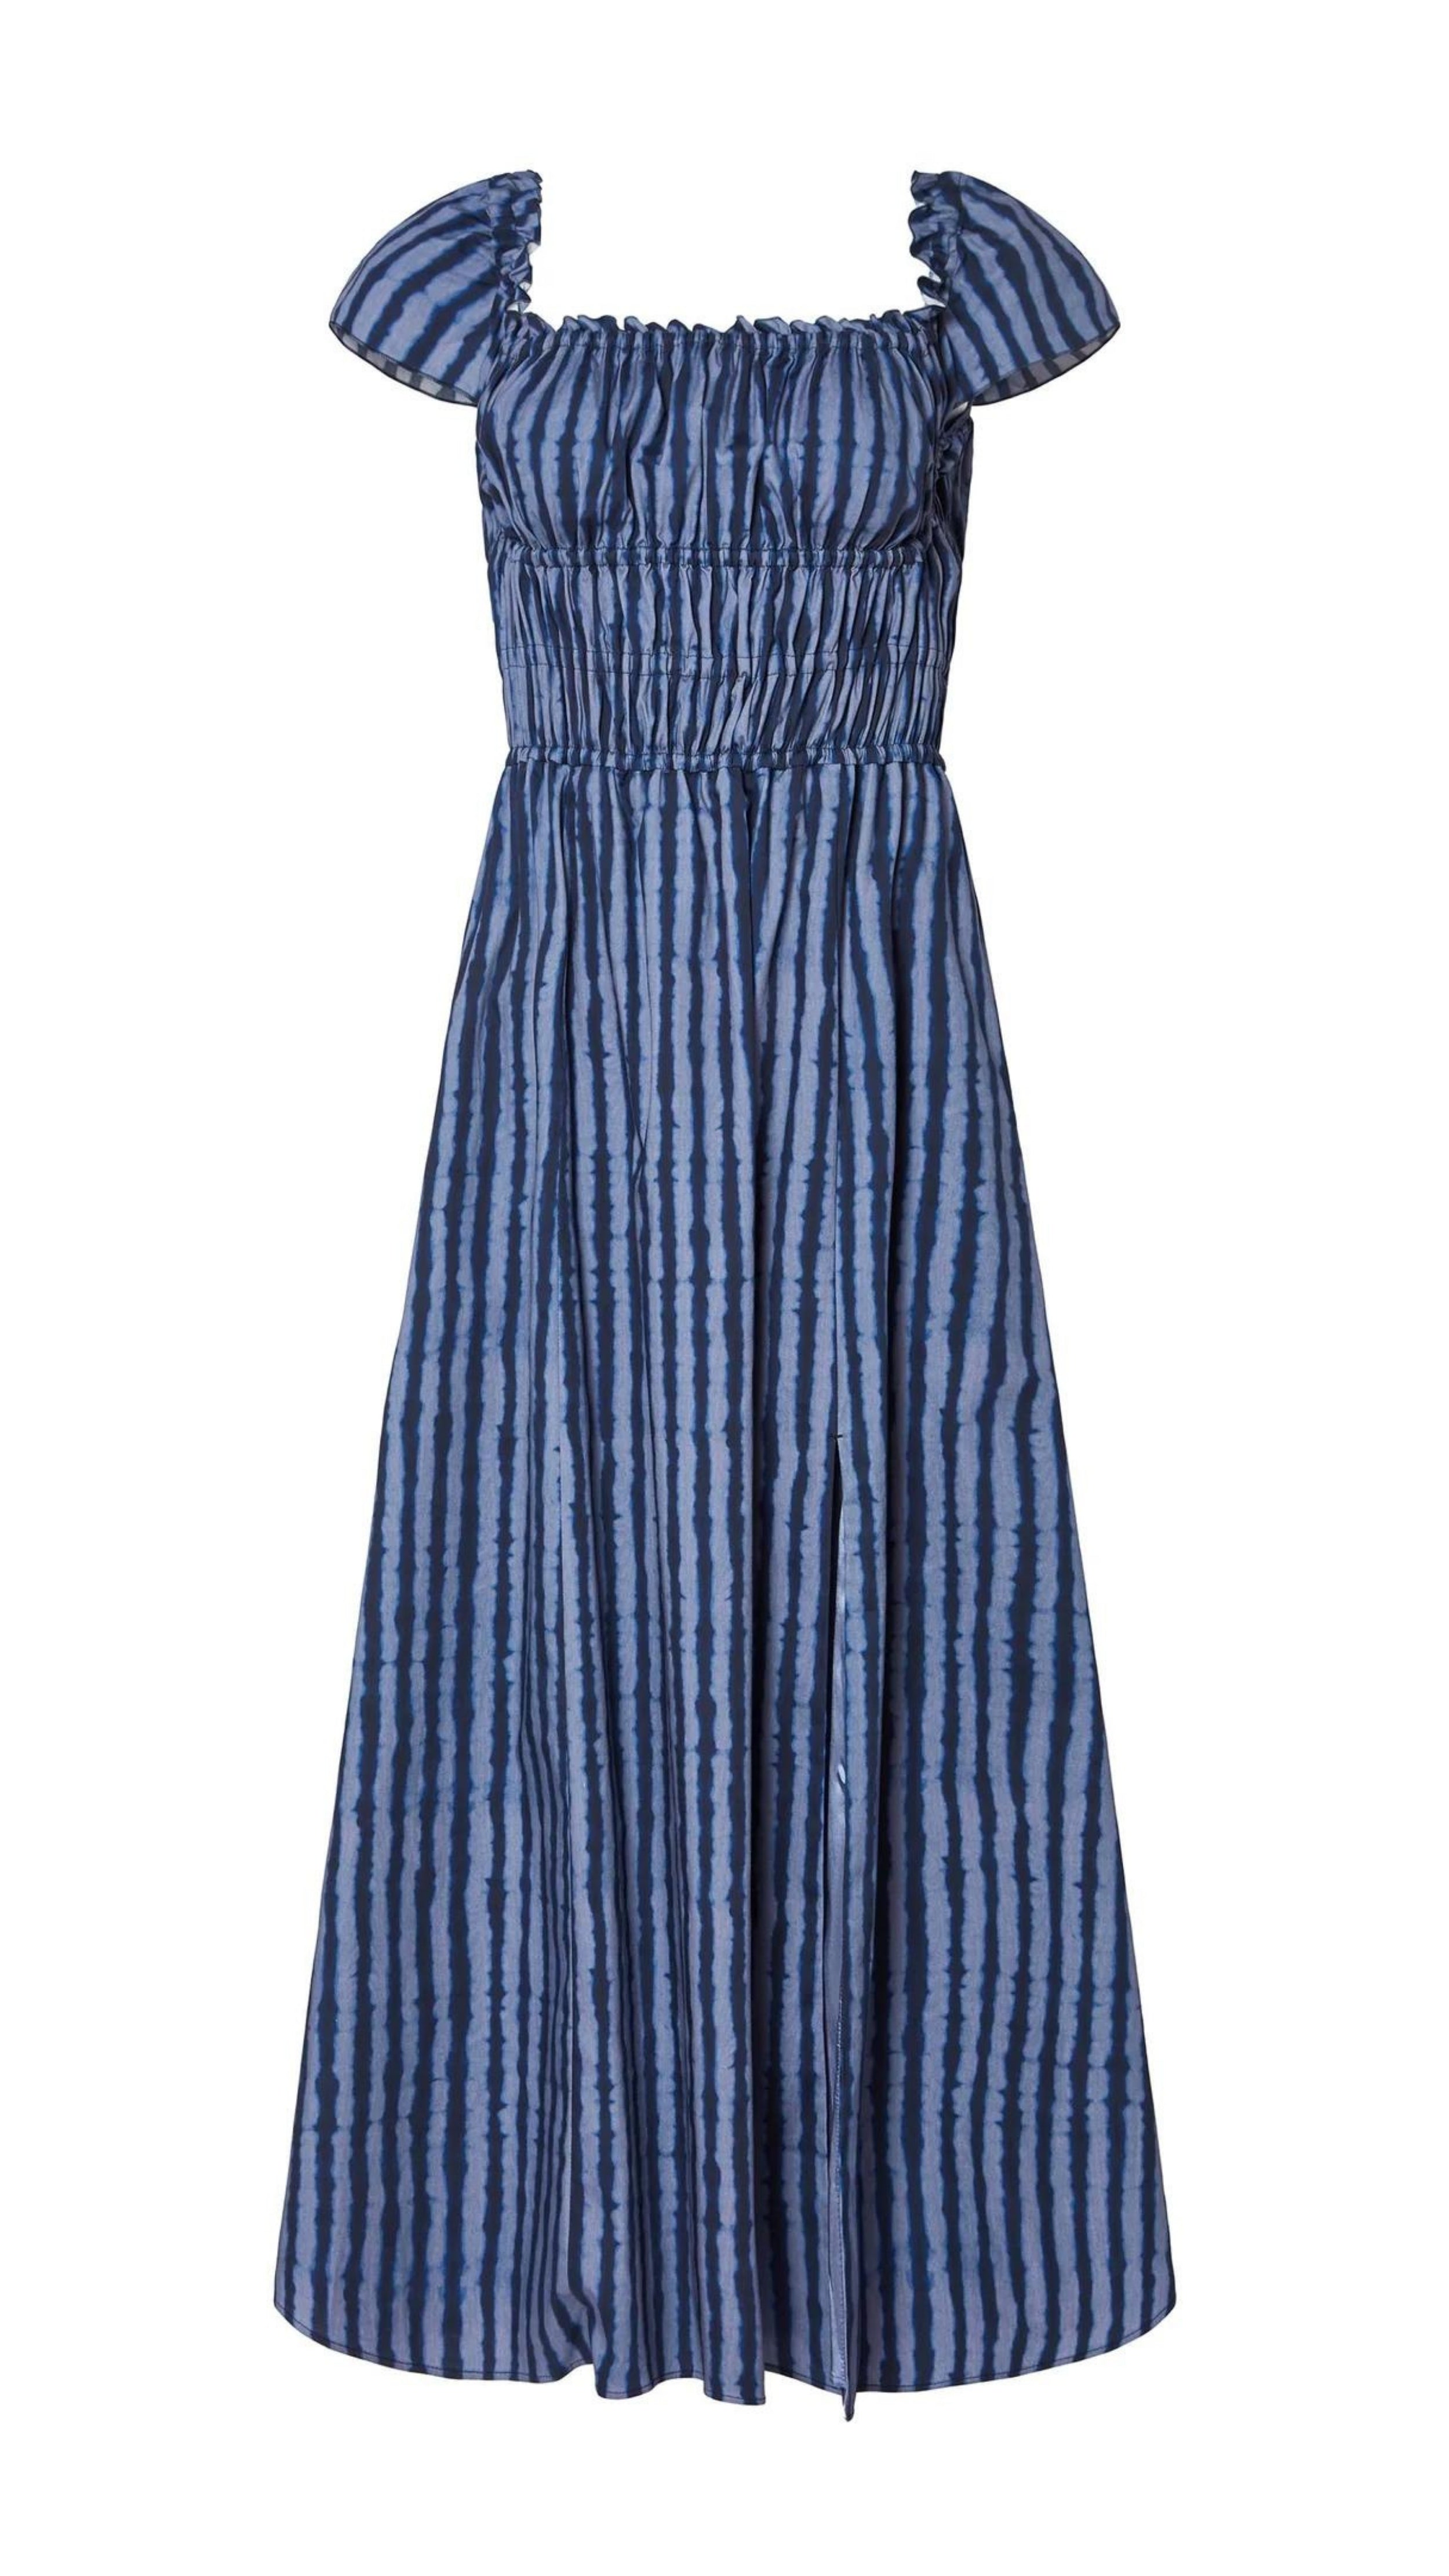 Altuzarra Lily Dress The 'Lily' dressmade from soft cotton. The midi dress  features a smocked construction and off-the-shoulder design. It has hidden pockets and a side slit in the skirt. In tones of blue. Product photo flat.